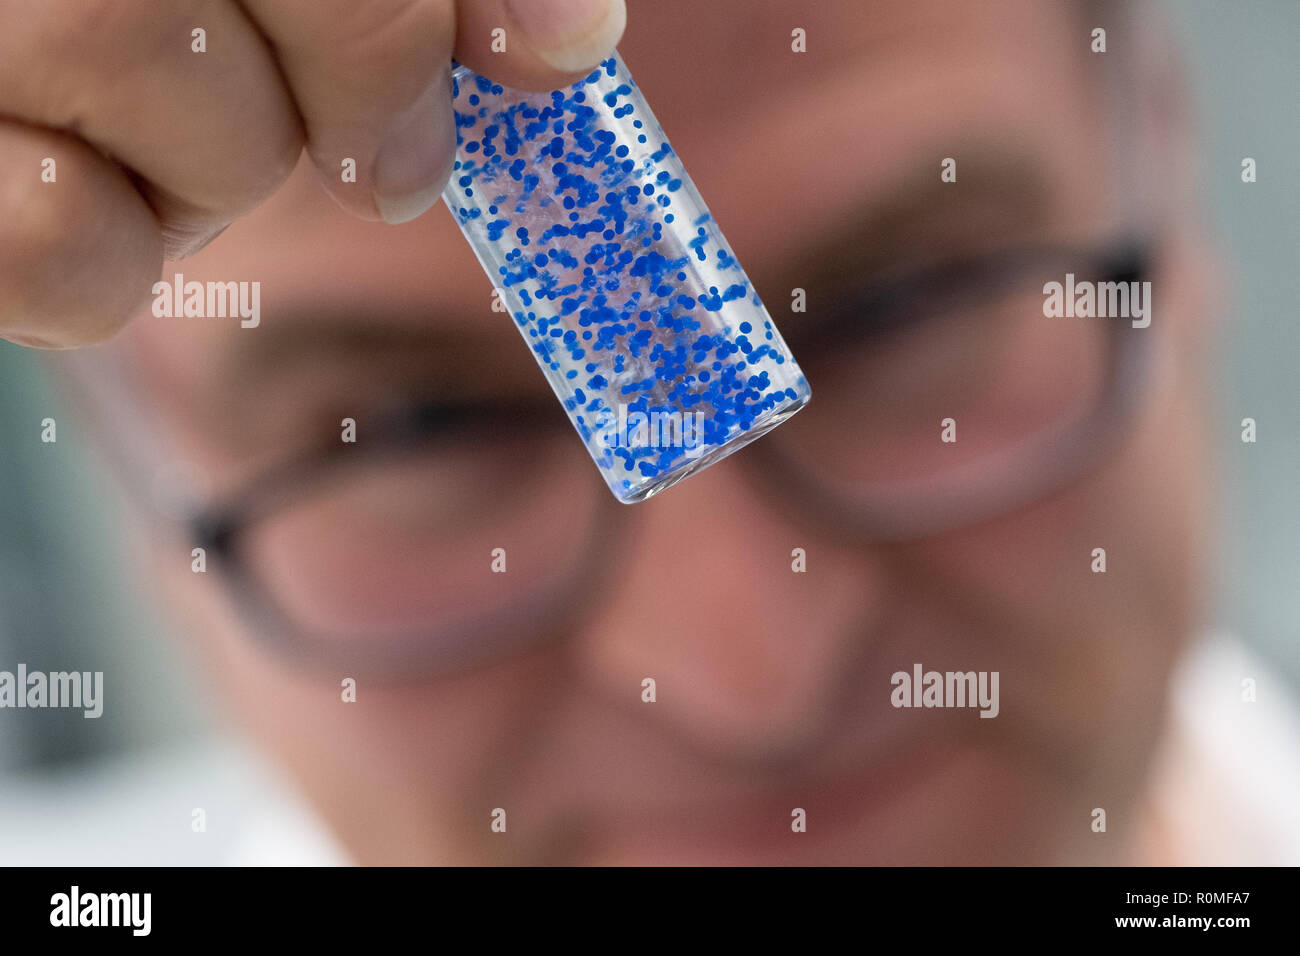 Holzminden, Germany. 23rd Oct, 2018. Ralf Bertram, an employee of Symrise AG, holds a plastic bottle with 'ActiPearls' at the encapsulation system. Symrise is one of the world's leading suppliers of fragrances and flavors. Credit: Swen Pförtner/dpa/Alamy Live News Stock Photo